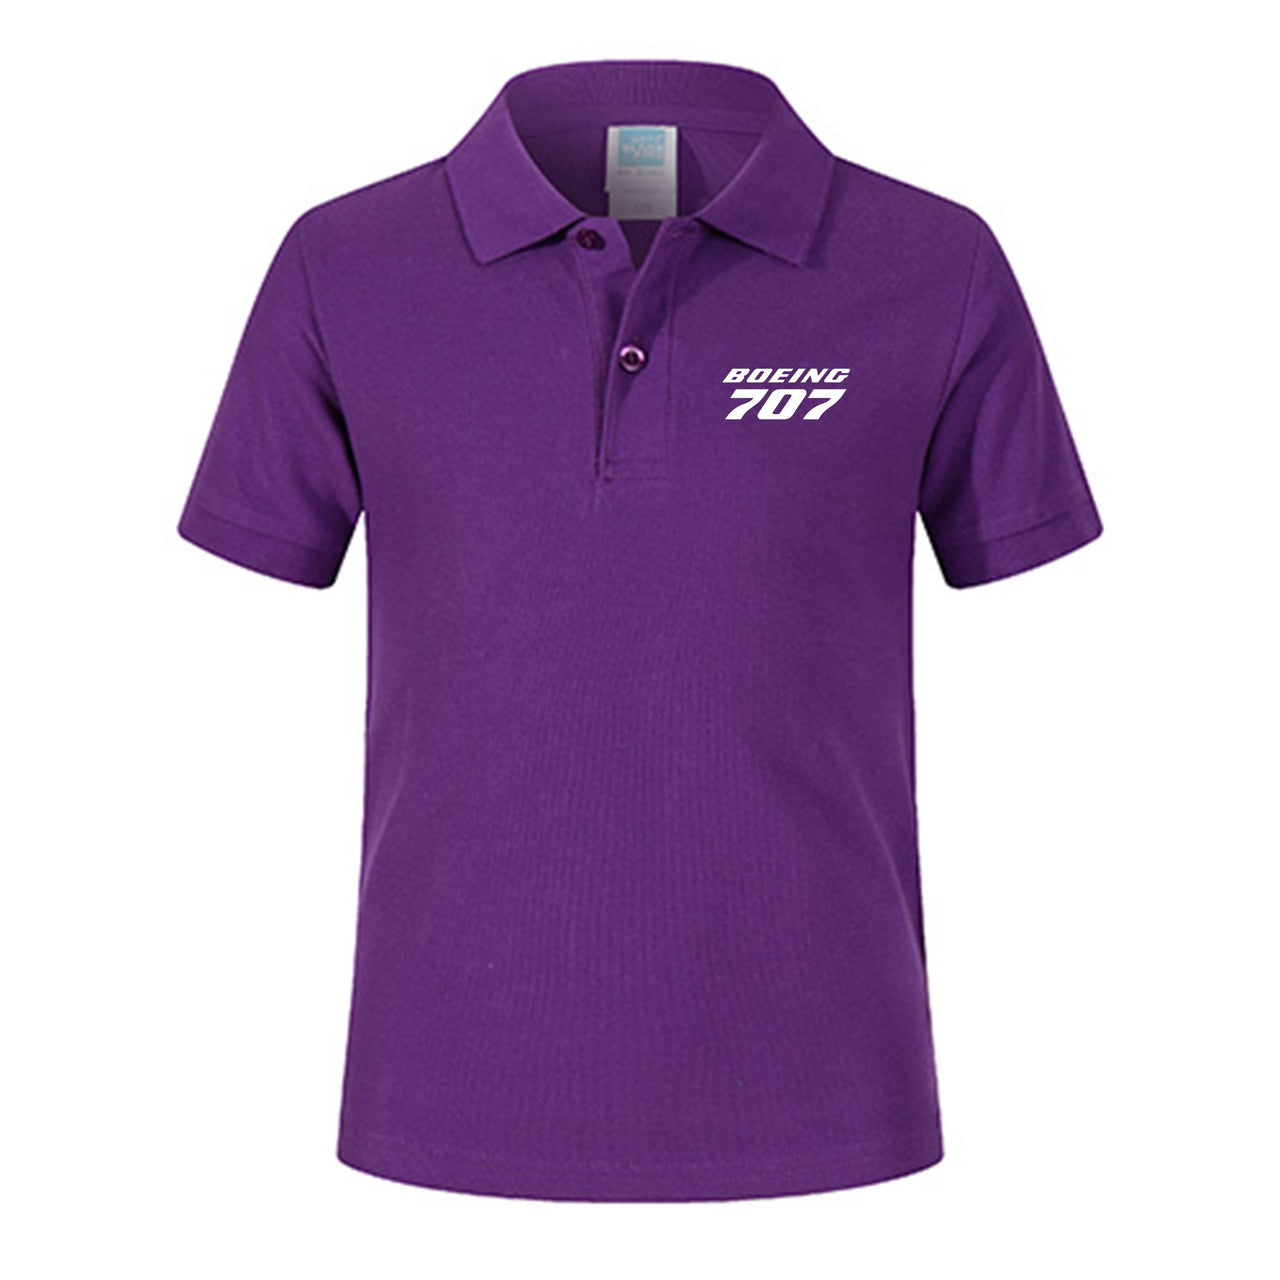 Boeing 707 & Text Designed Children Polo T-Shirts